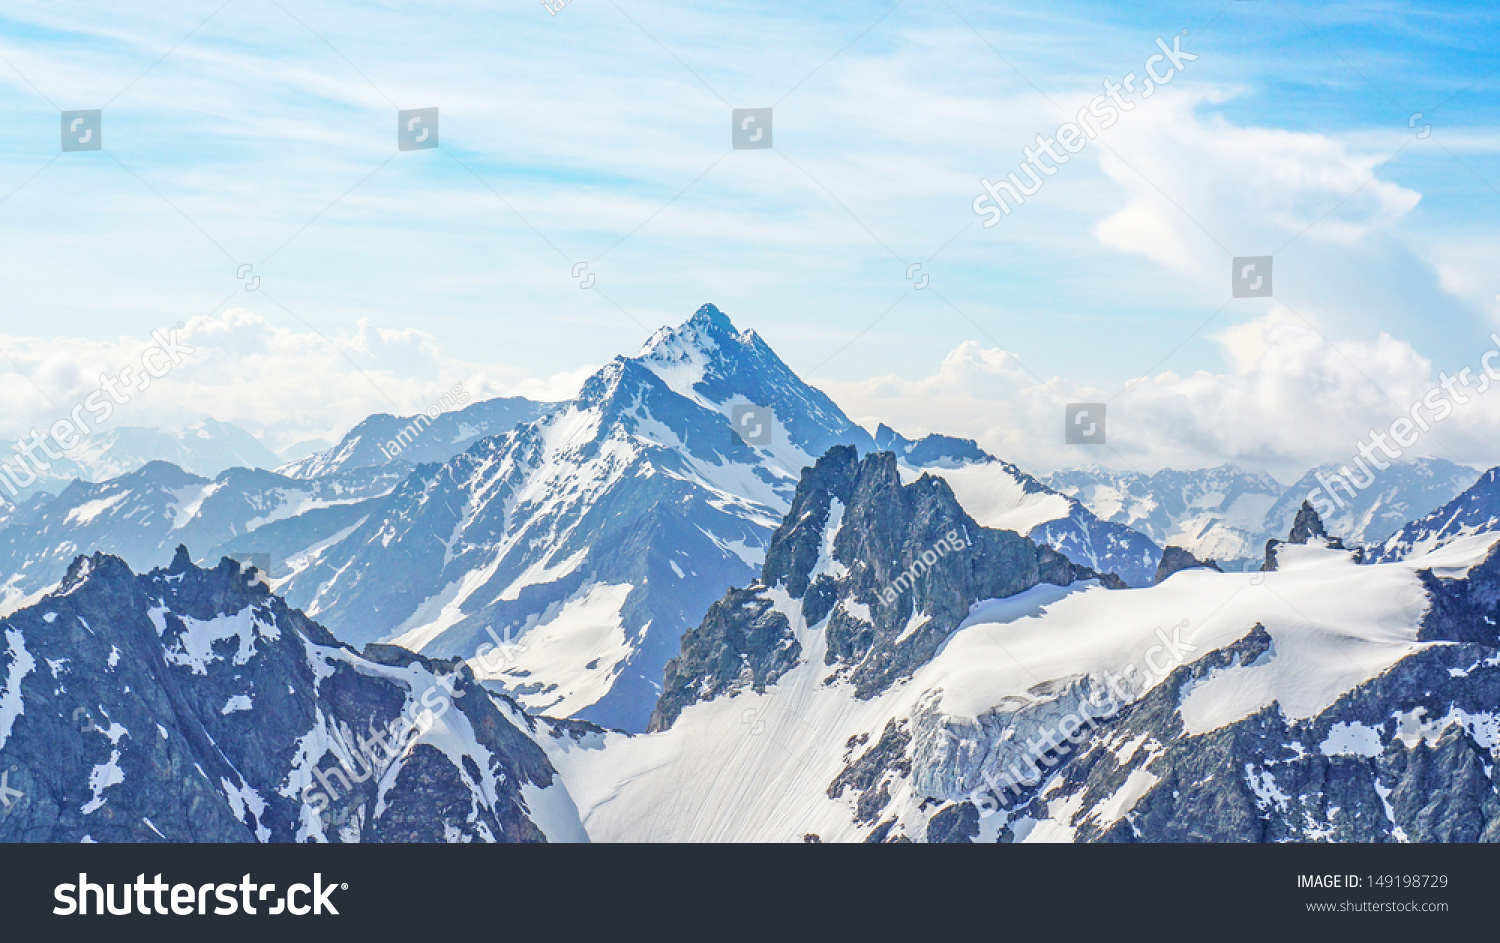 The Alps from the Titlis Peak #149198729